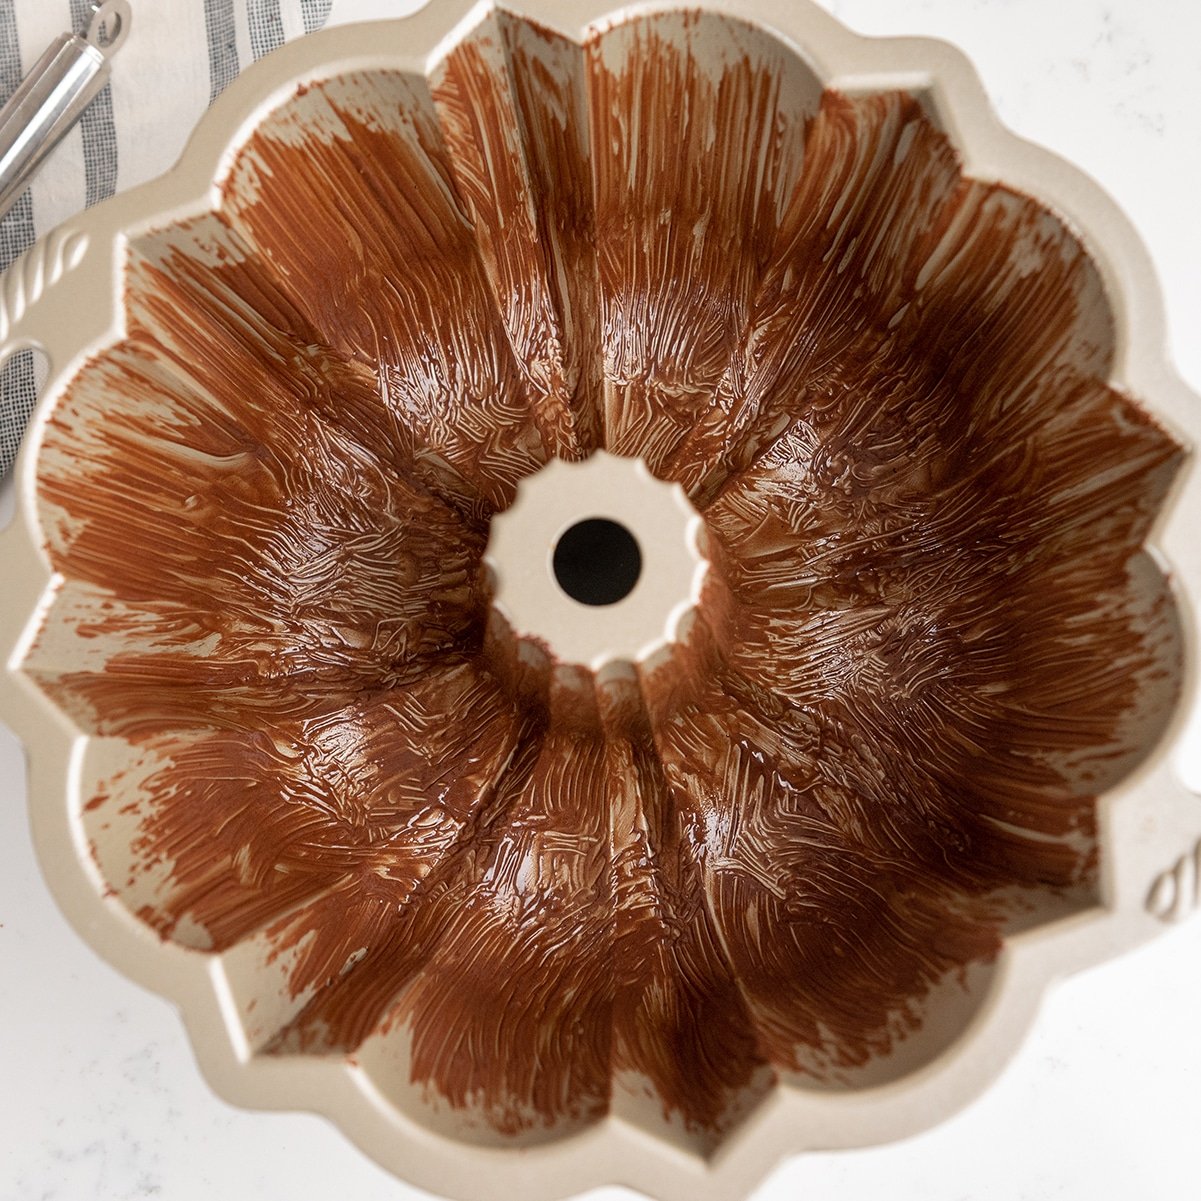 bundt pan greased with chocolate pan release